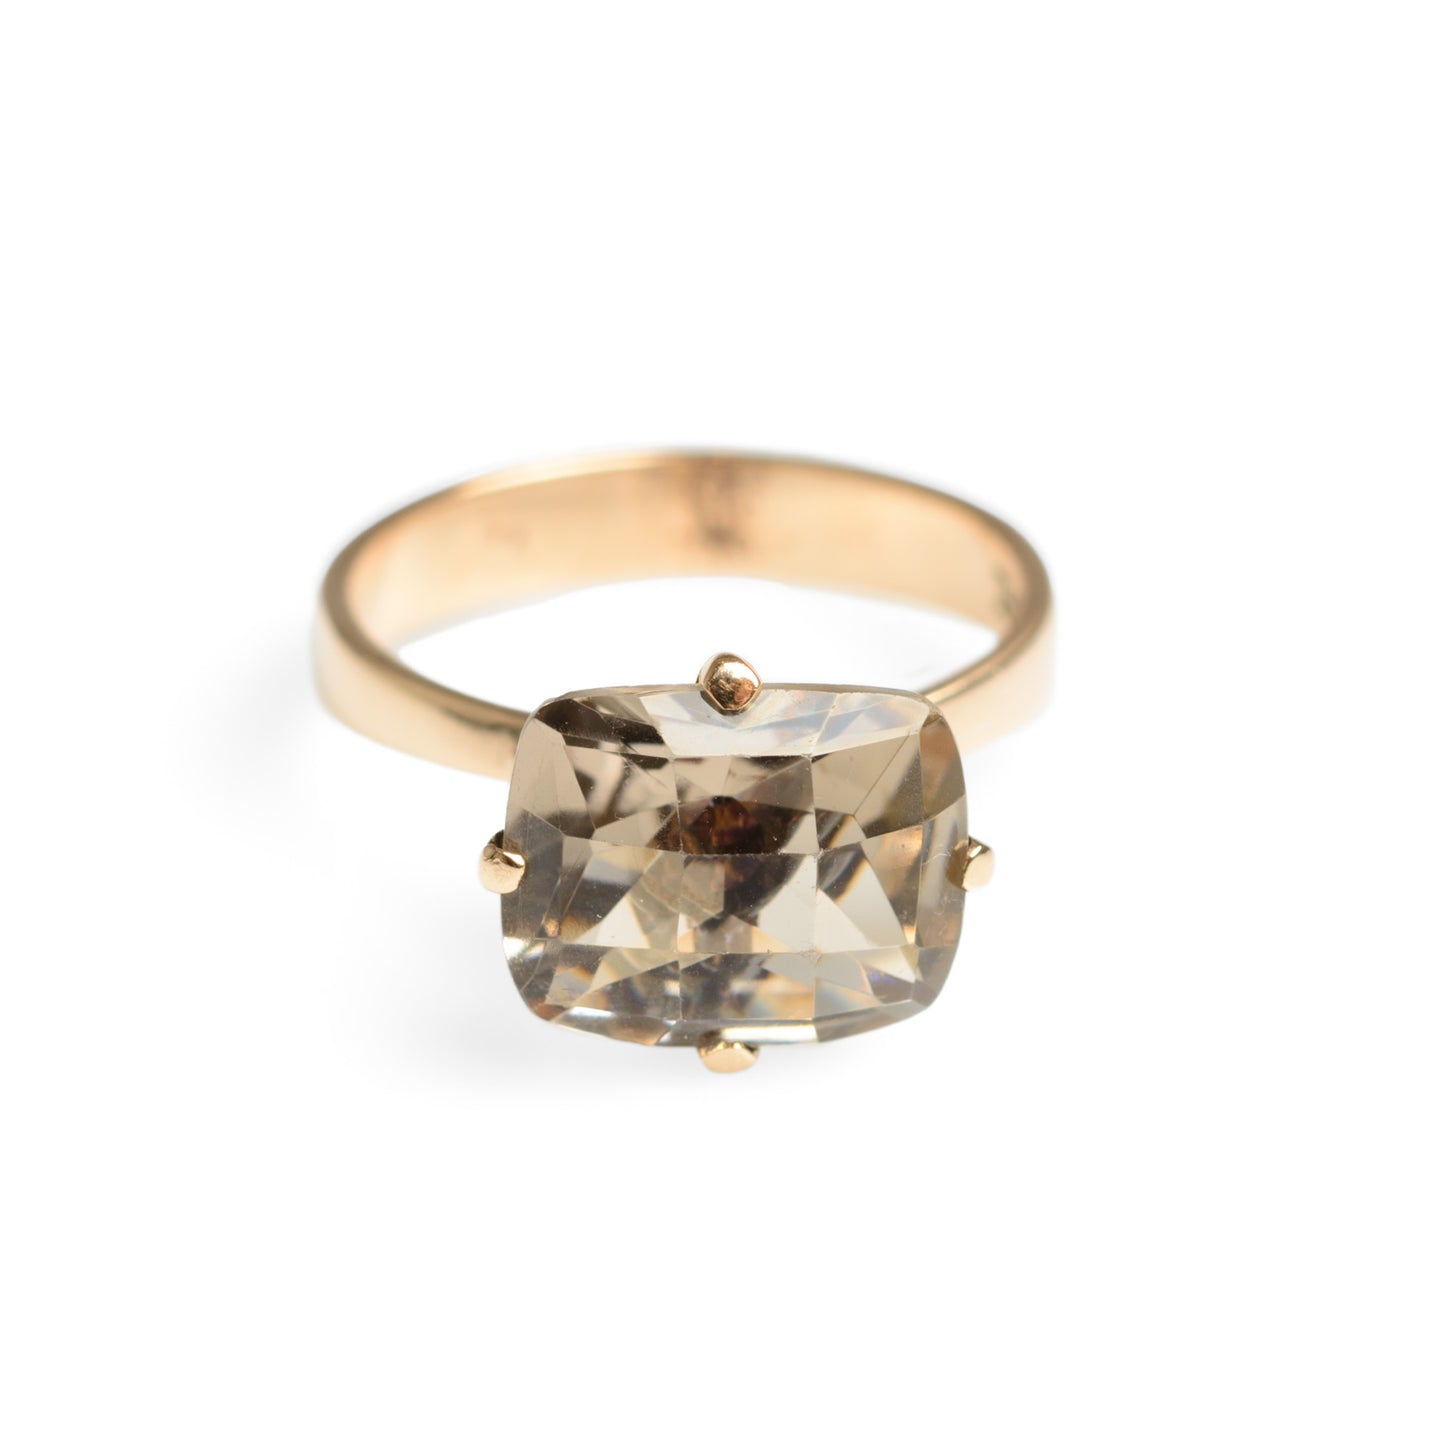 Vintage 9ct Gold Solitaire Statement Ring With Light Smoky Quartz Rectangular Cushion Cut Gemstone Size P US Size 7.5 (Code A586)